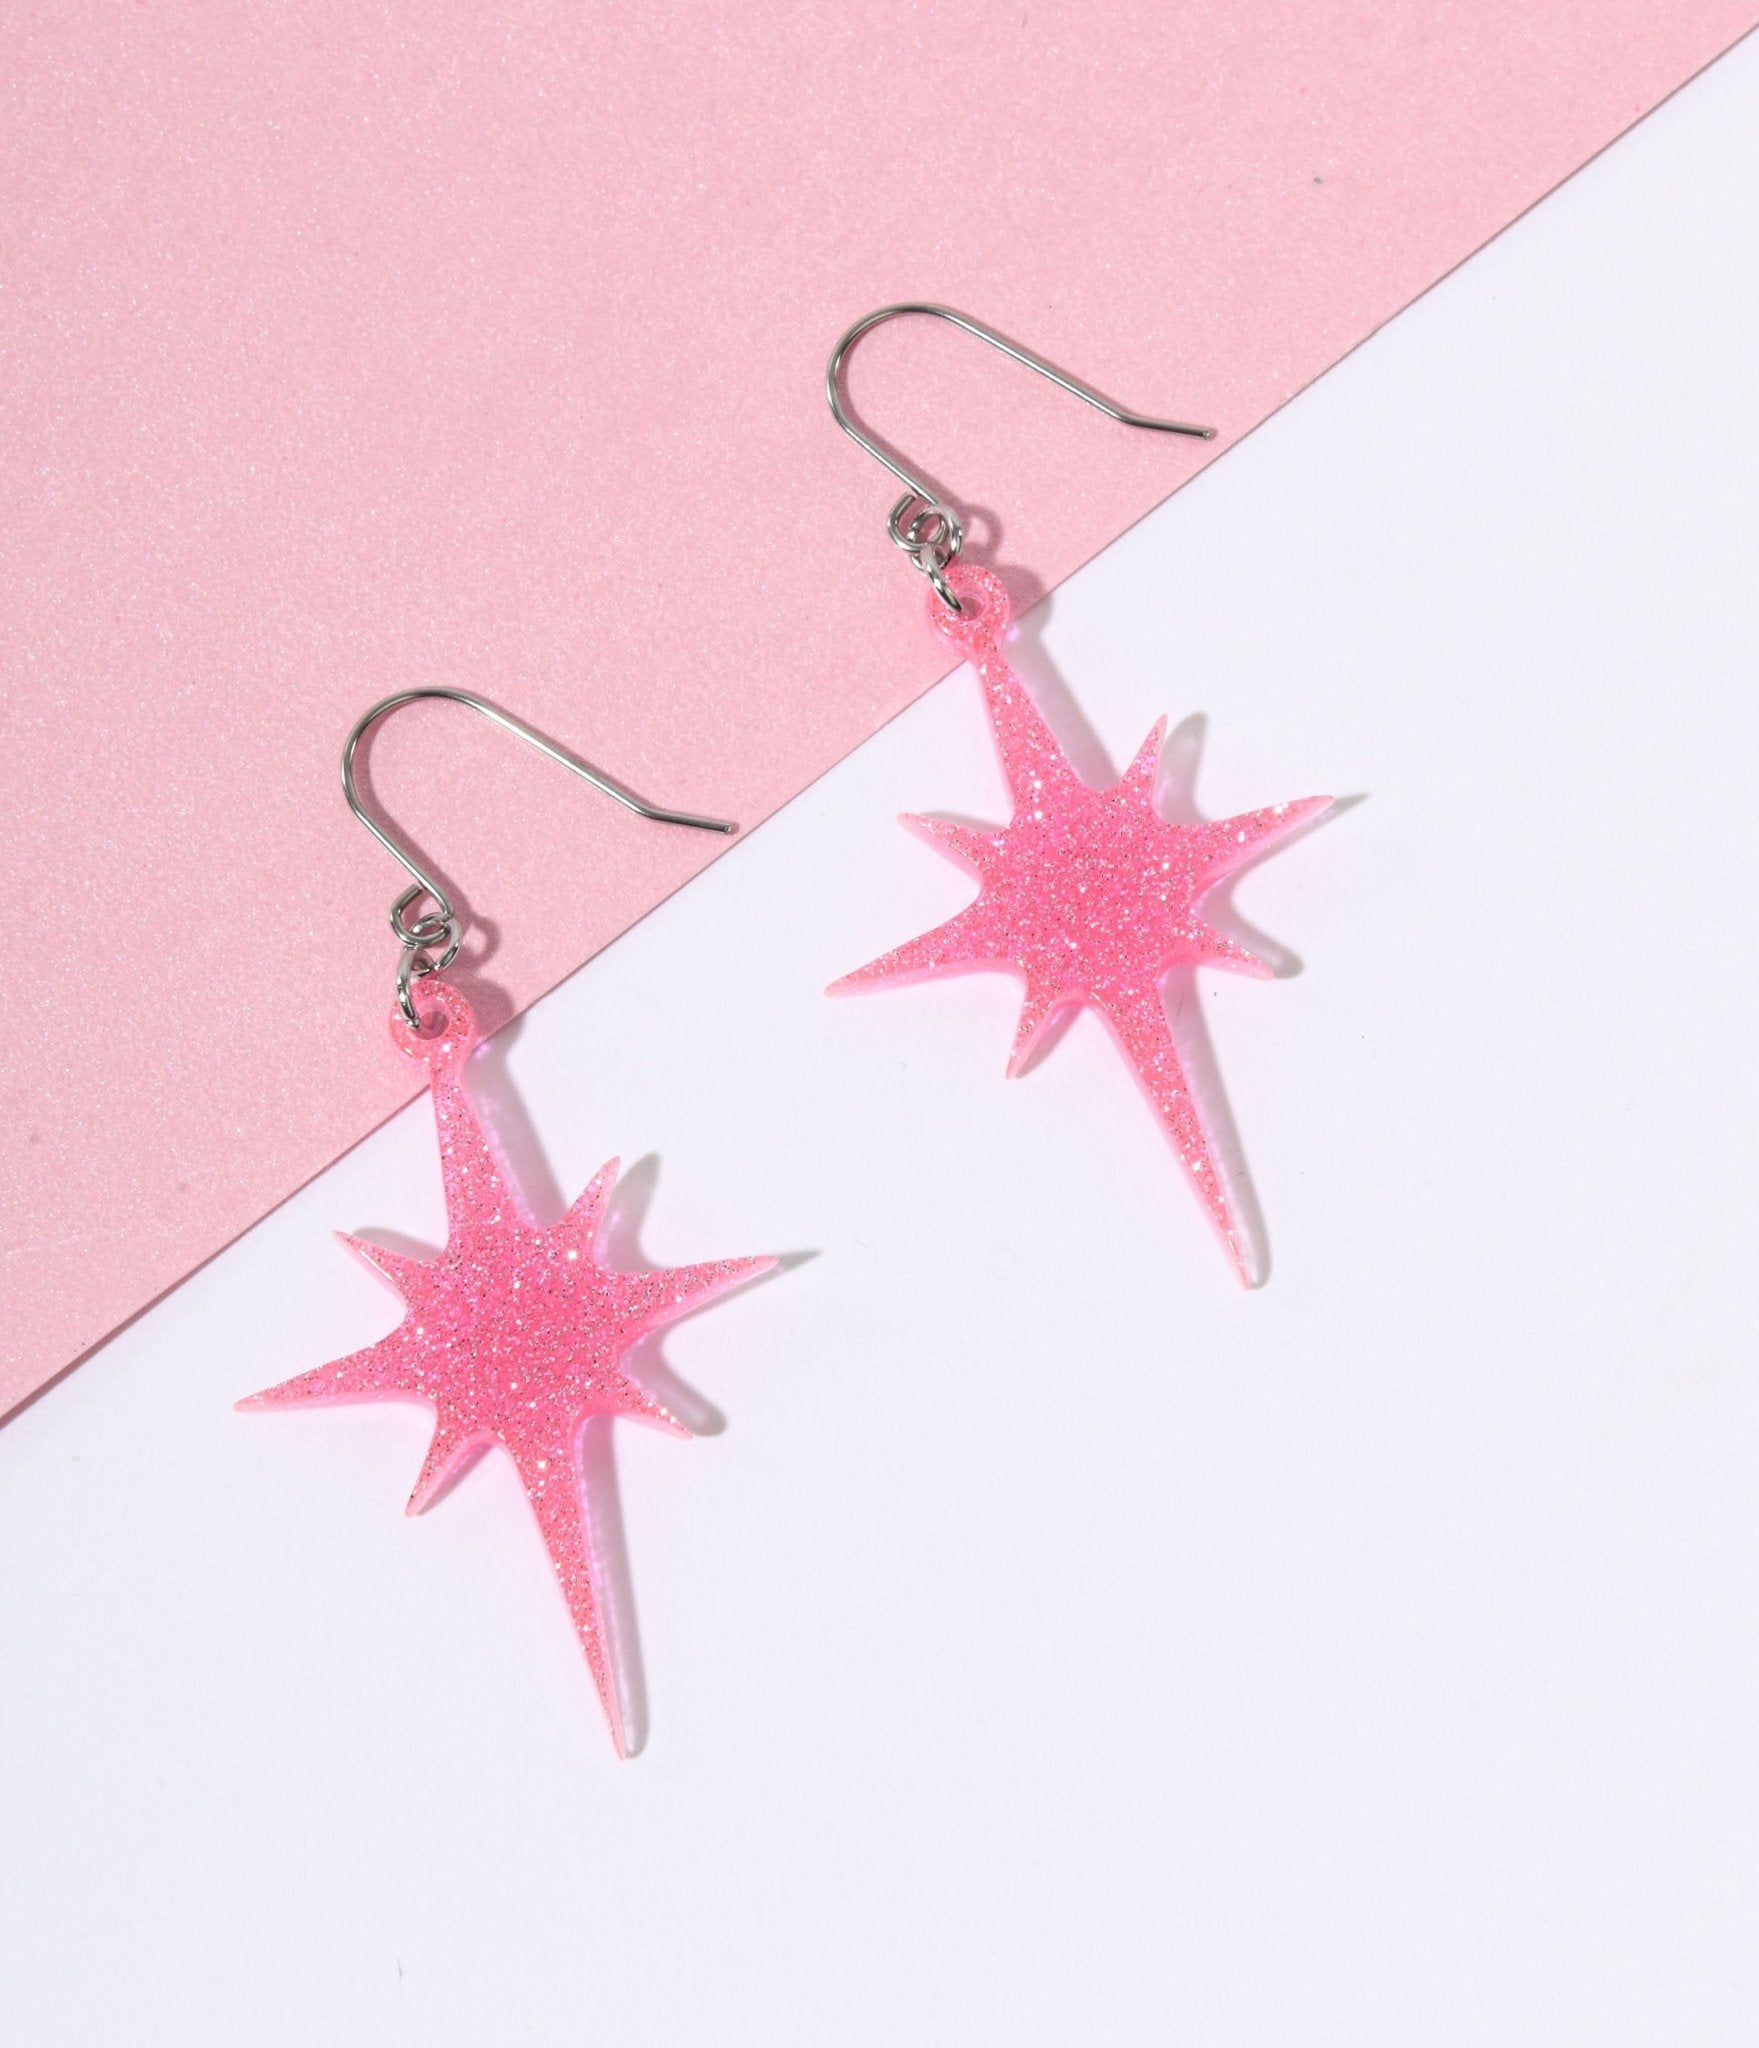 Pink Glitter Atomic Star Dangle Earrings - Unique Vintage - Womens, ACCESSORIES, JEWELRY